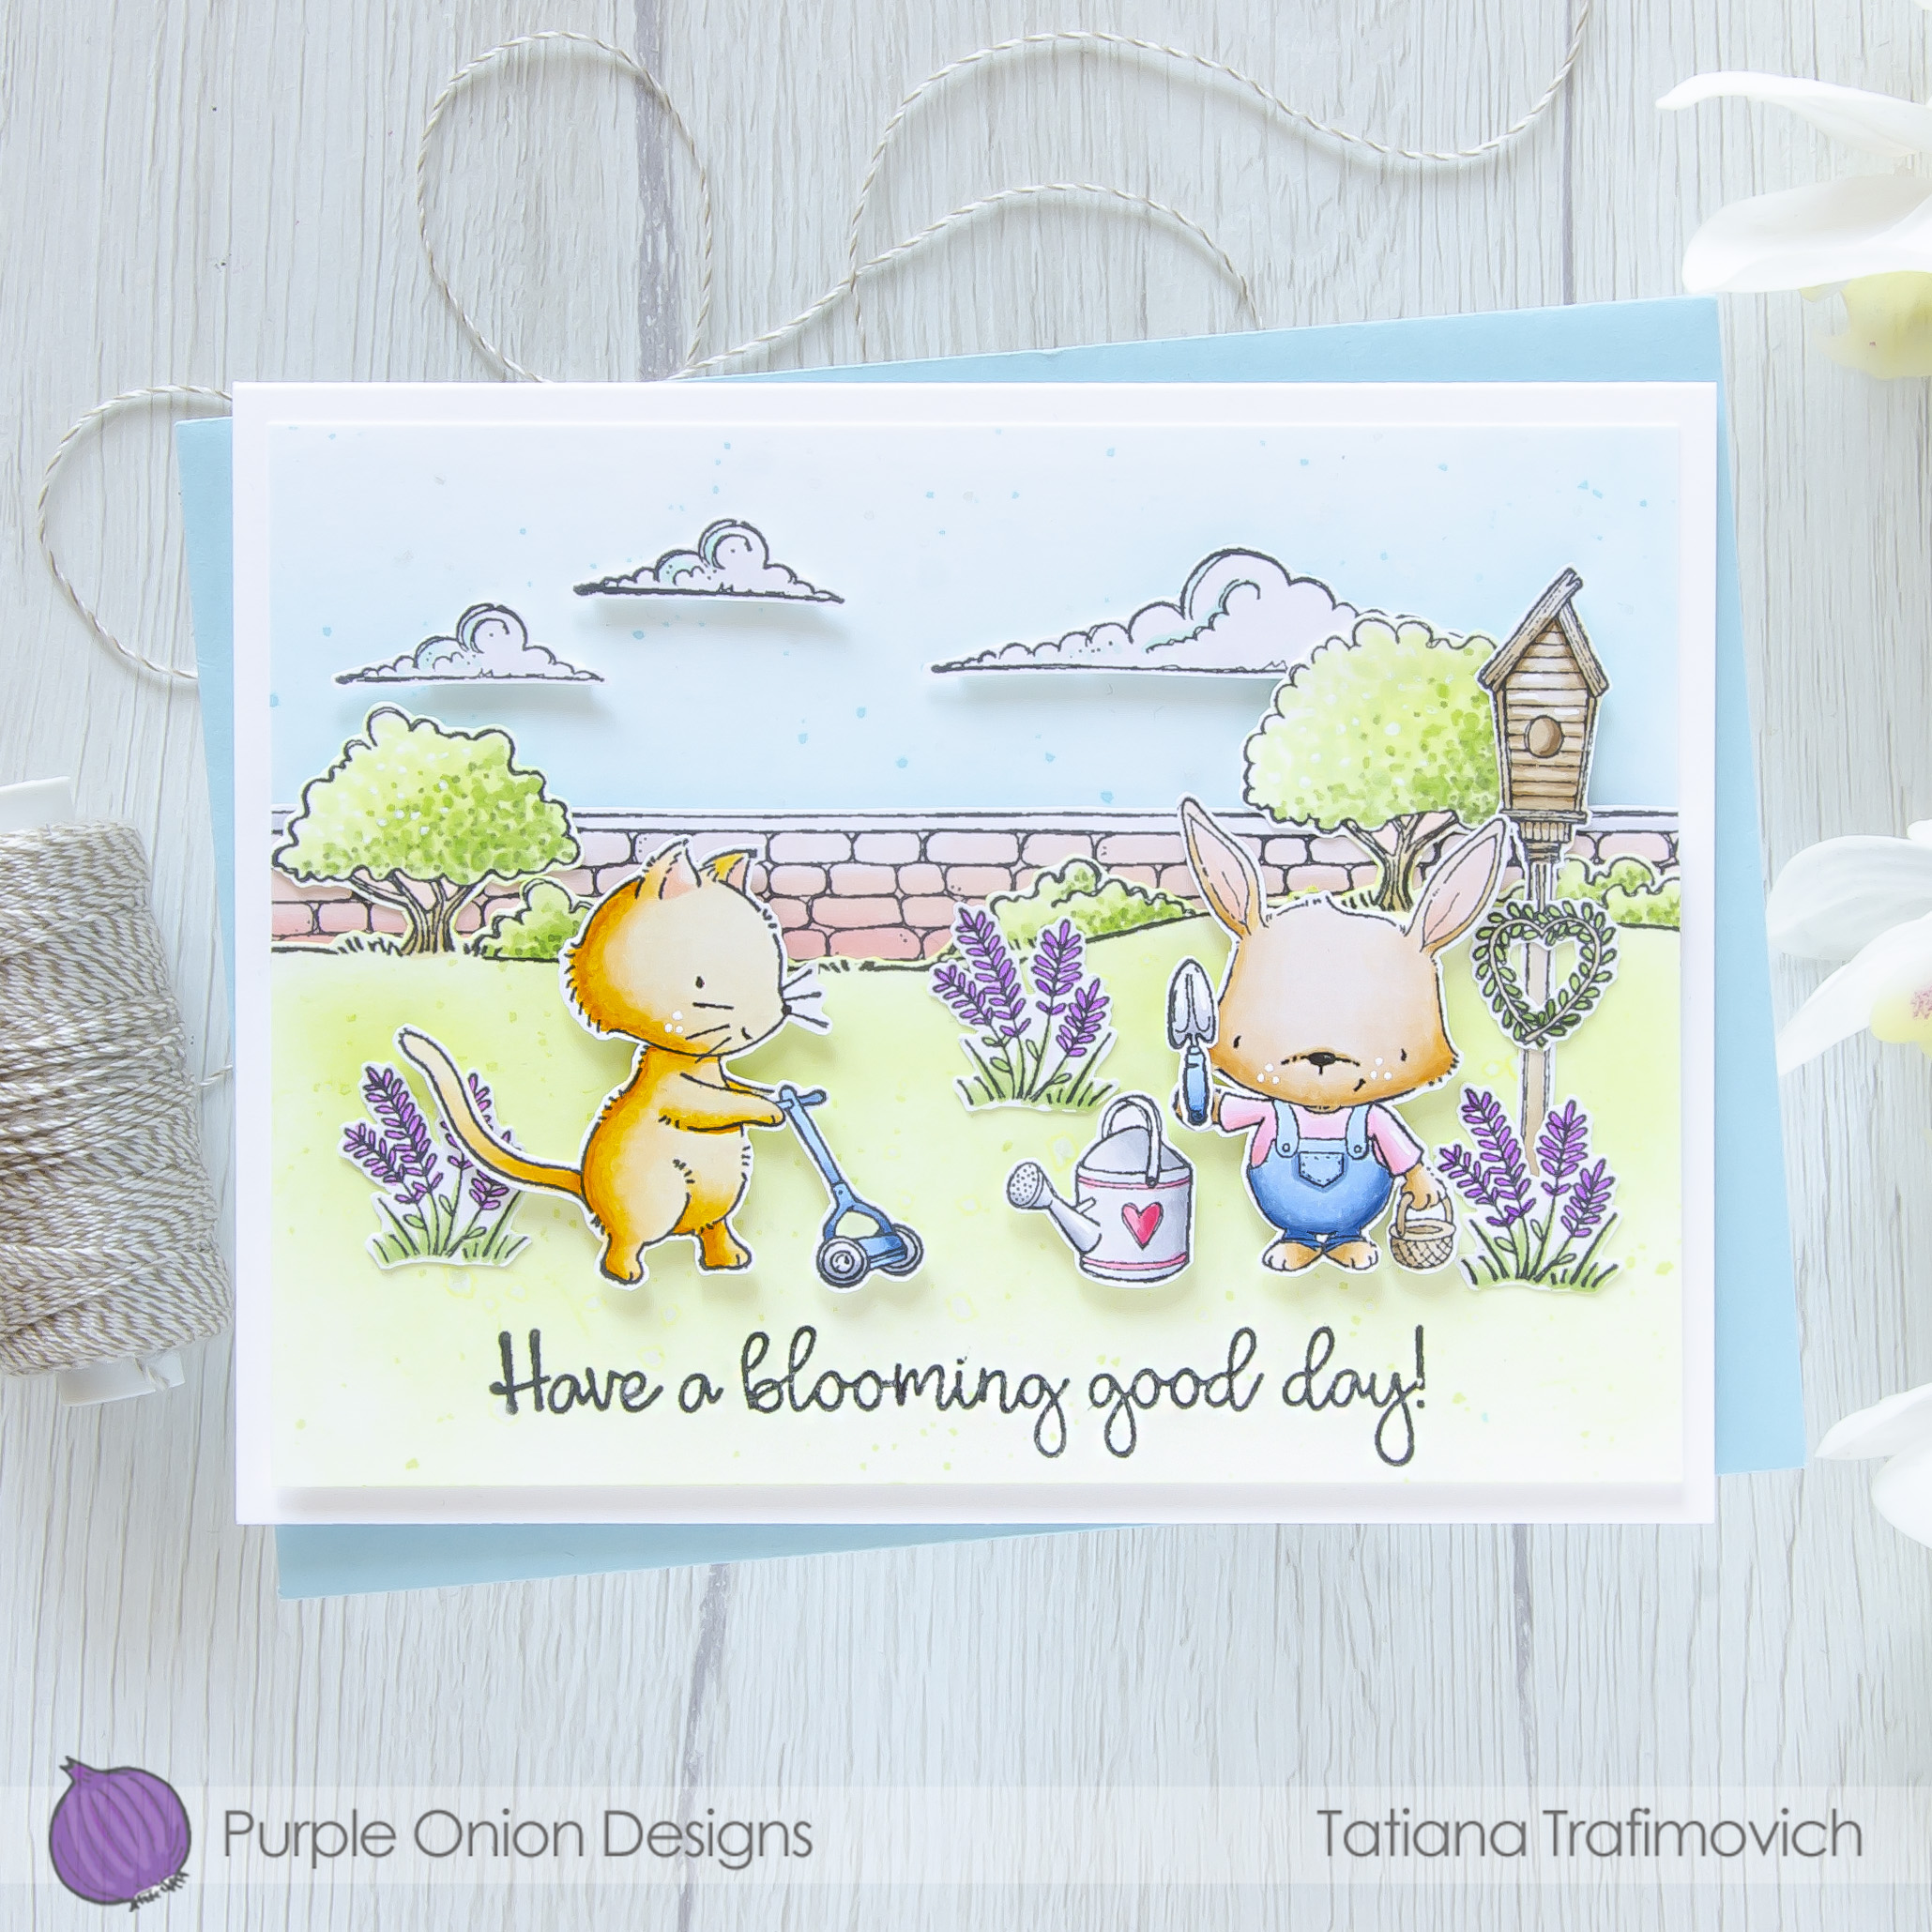 Have A Blooming Good Day! #handmade card by Tatiana Trafimovich #tatianacraftandart - stamps by Purple Onion Designs 